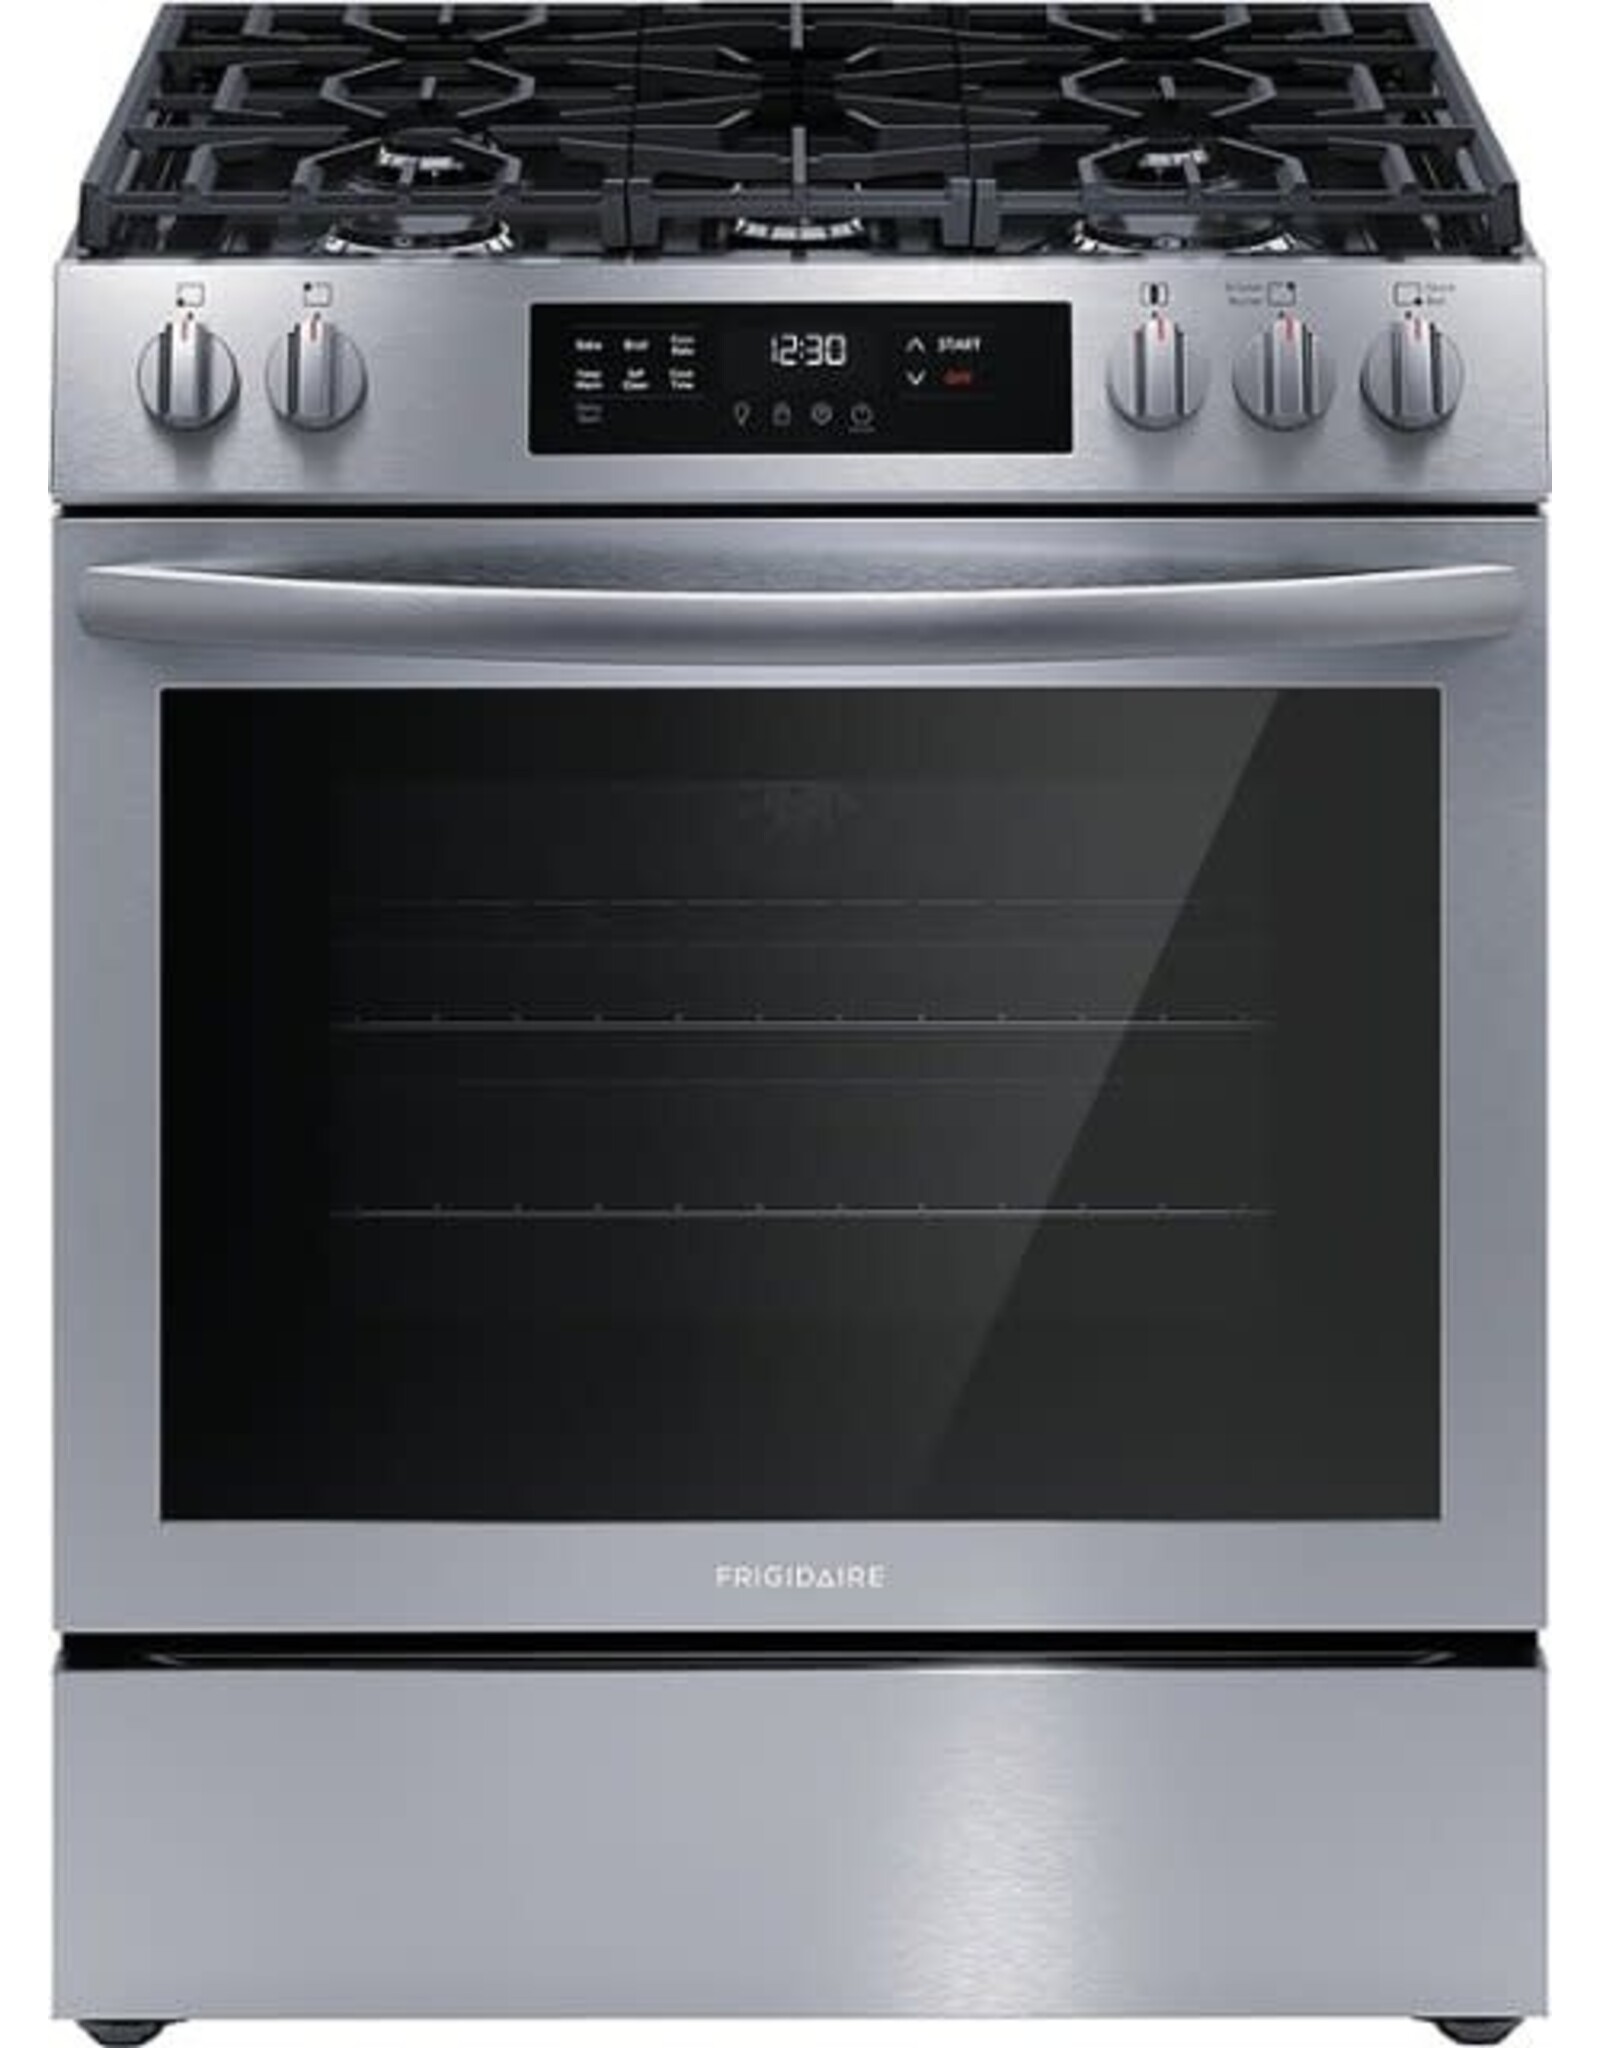 FRIGIDAIRE FCRG3083AS 30 in. 5 Burners Slide-In Front Control Self-Cleaning Gas Range with Convection in Stainless Steel